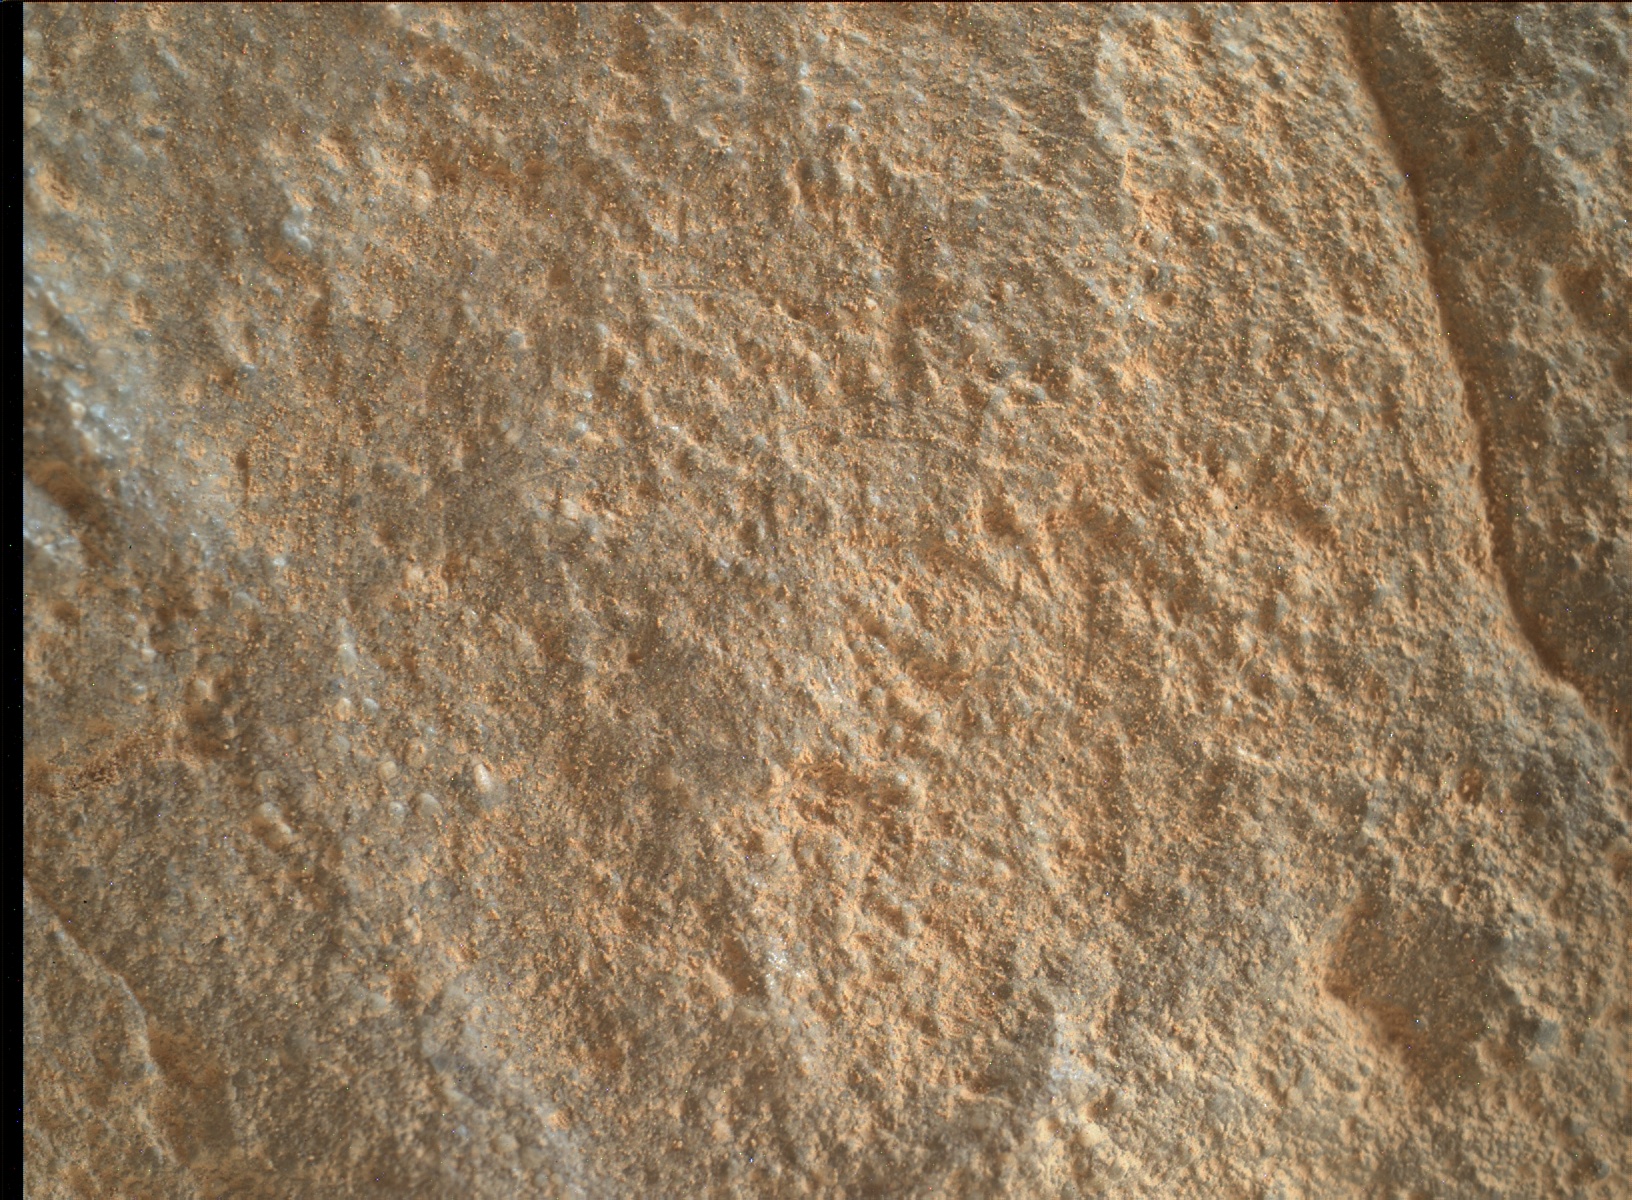 Nasa's Mars rover Curiosity acquired this image using its Mars Hand Lens Imager (MAHLI) on Sol 3409